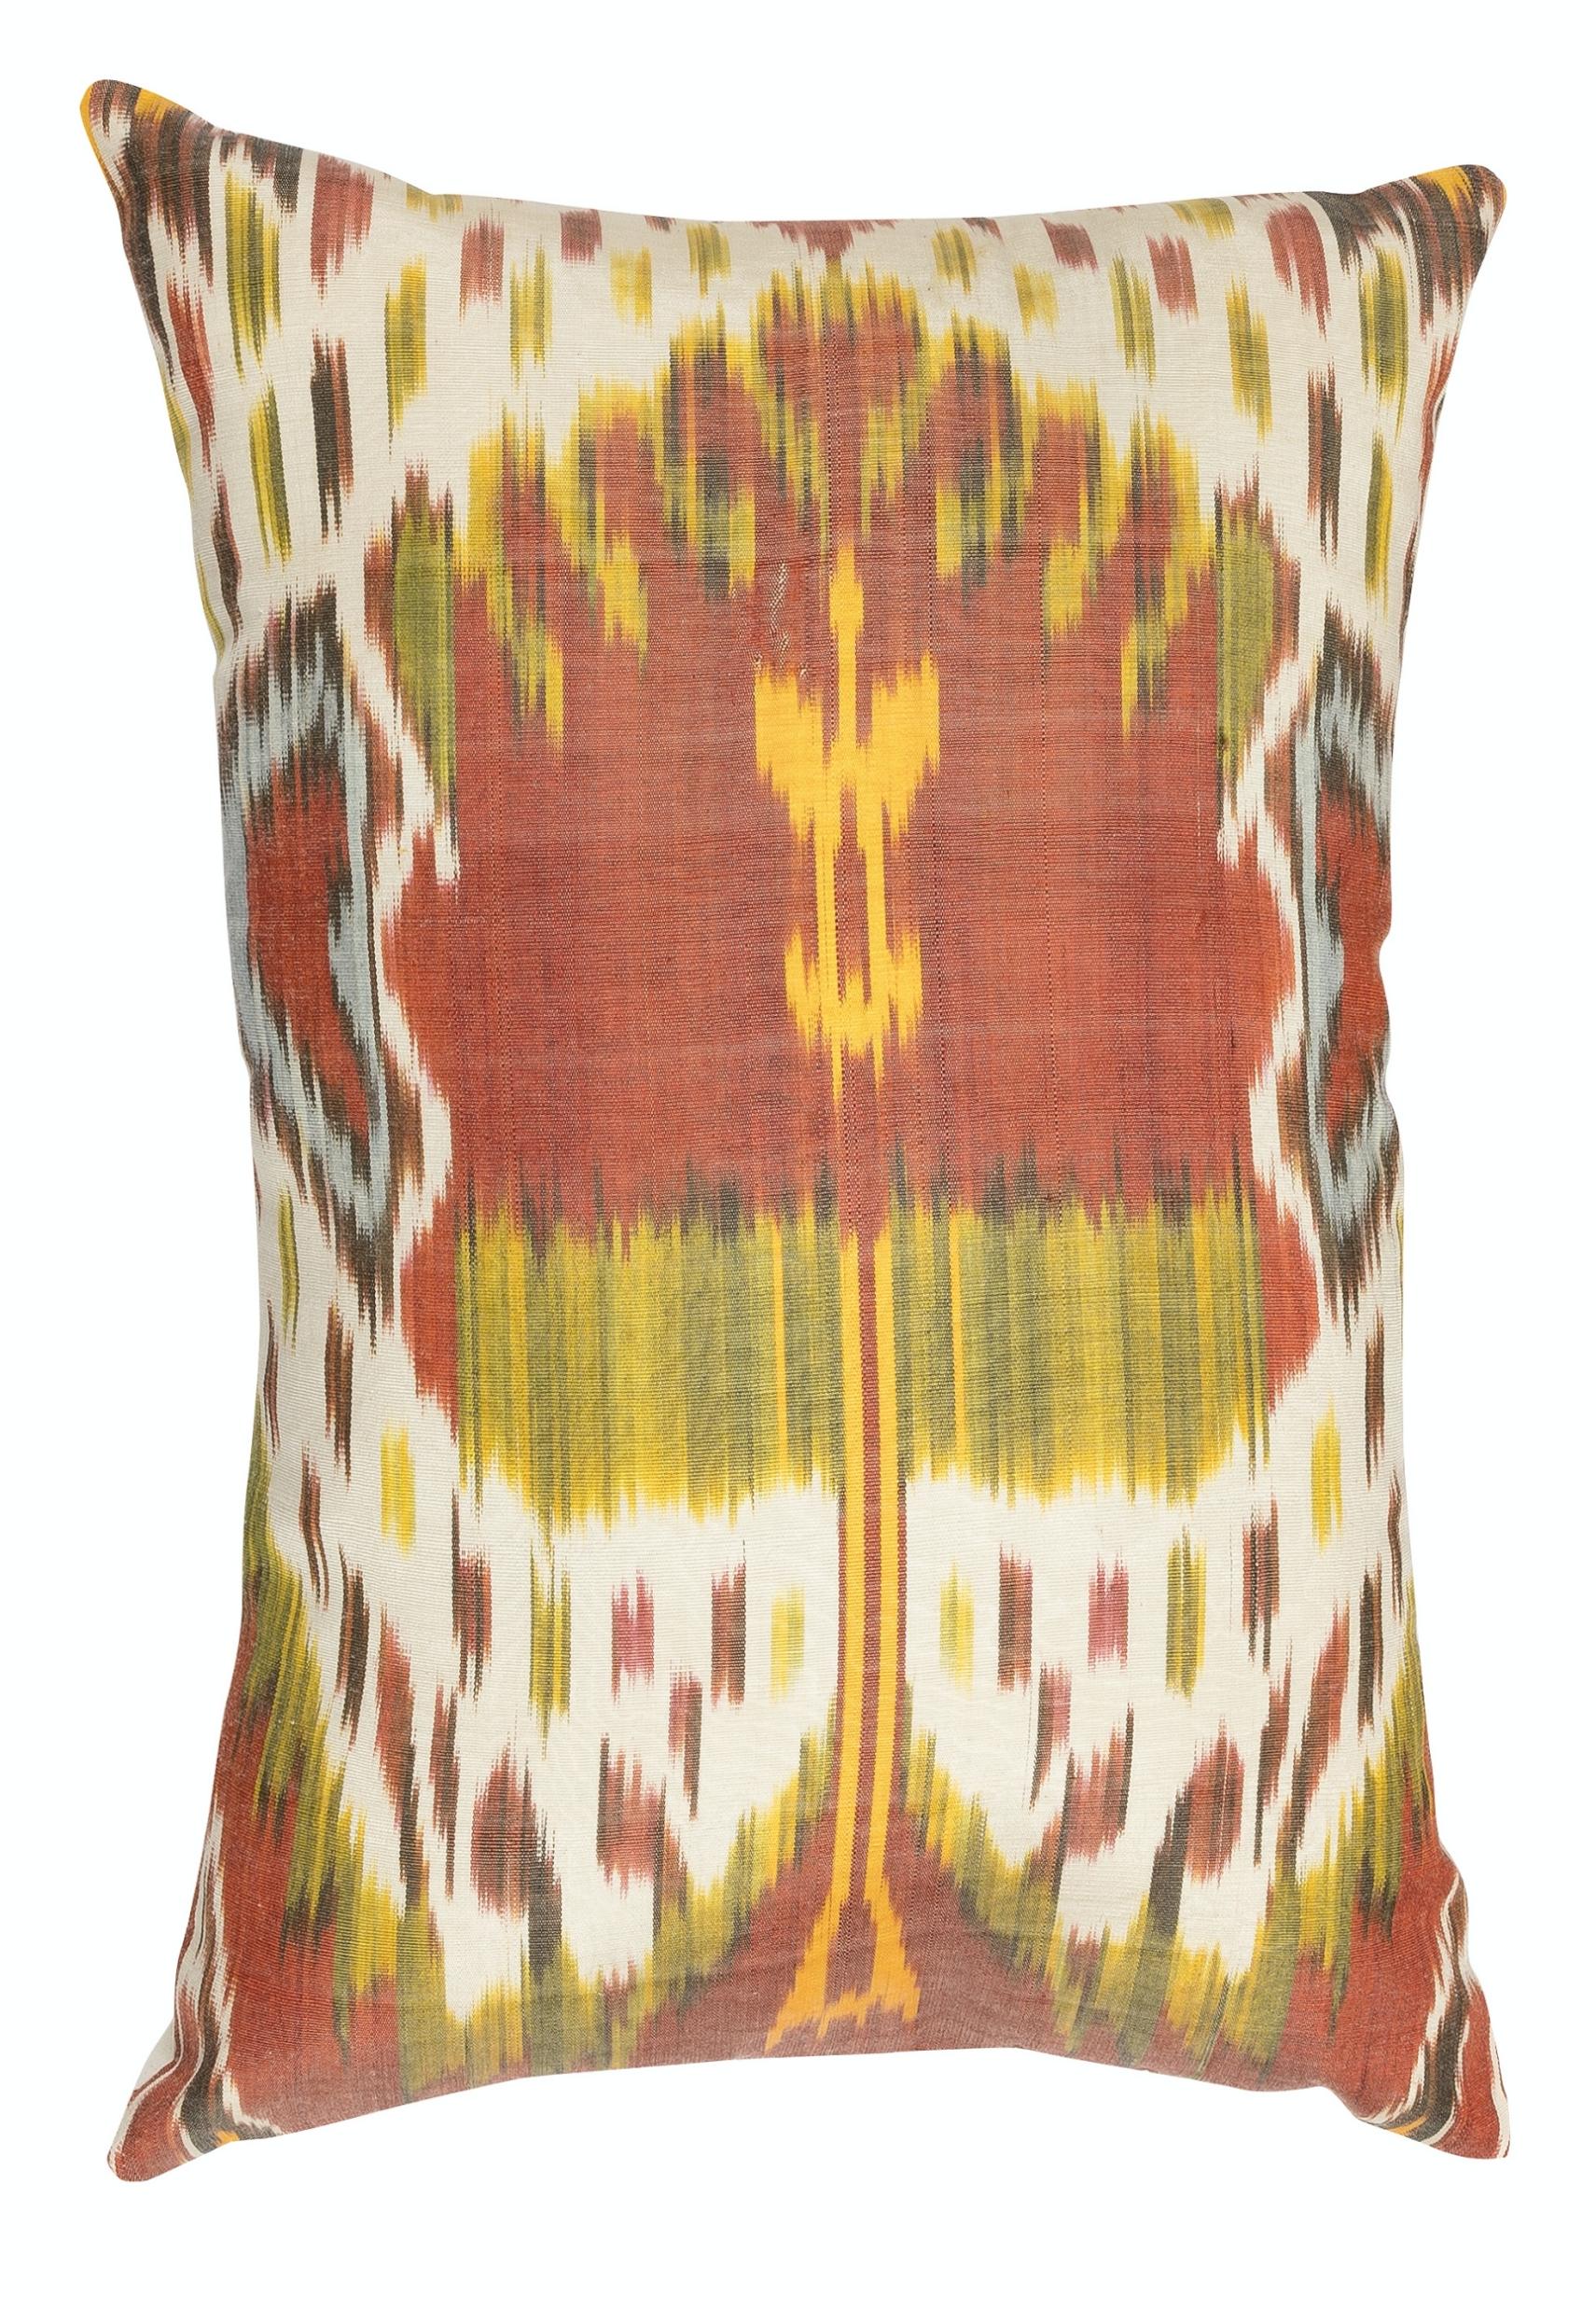 Uzbek HandWoven Colorful Cushion Cover from All Cotton IKAT Fabric, Vintage Pillowcase For Sale